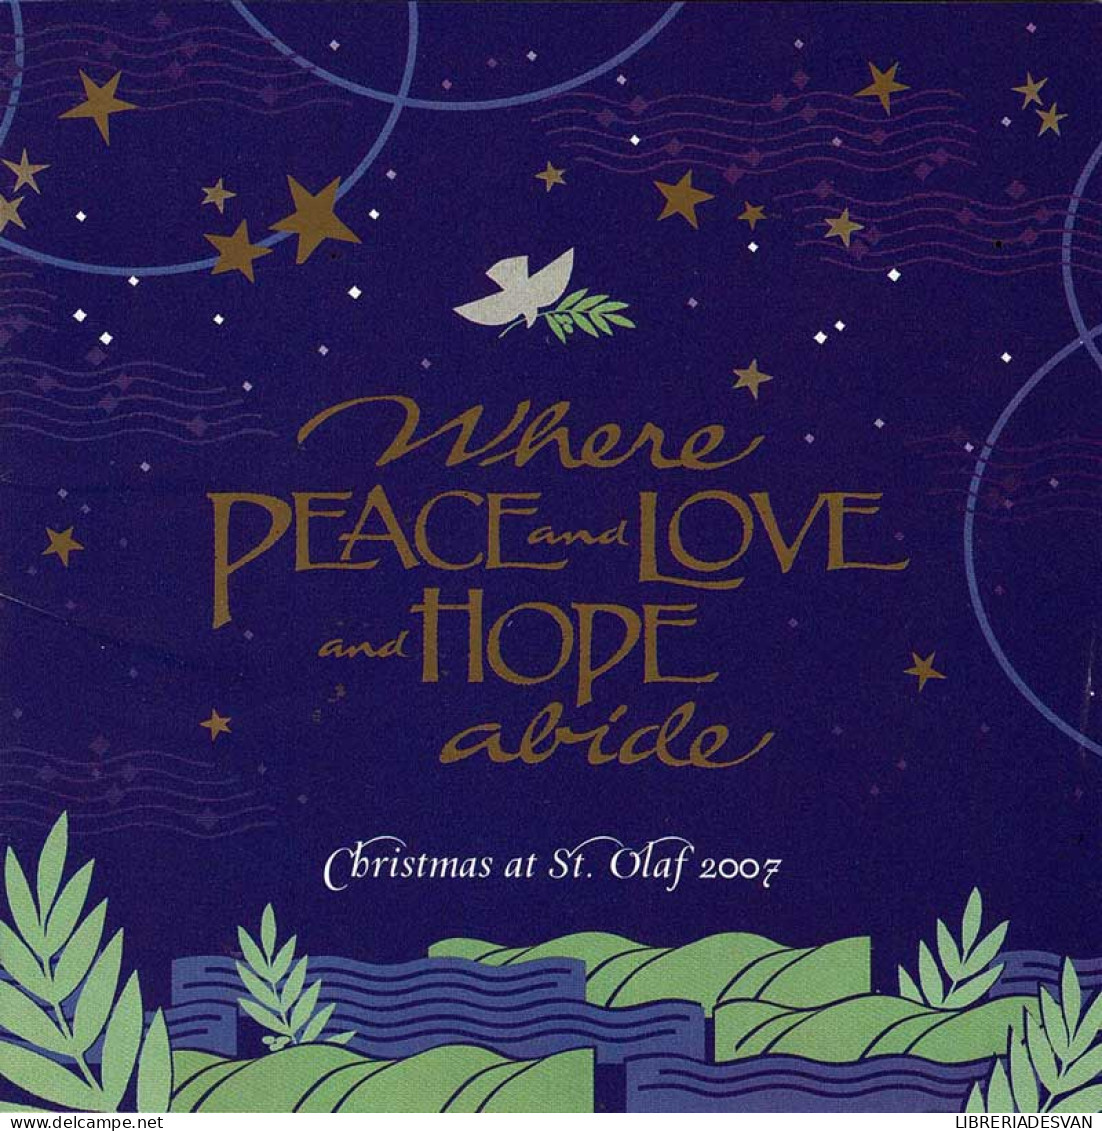 Christmas At St. Olaf 2007 - Where Peace And Love And Hope Abide. 2 X CD - Klassik